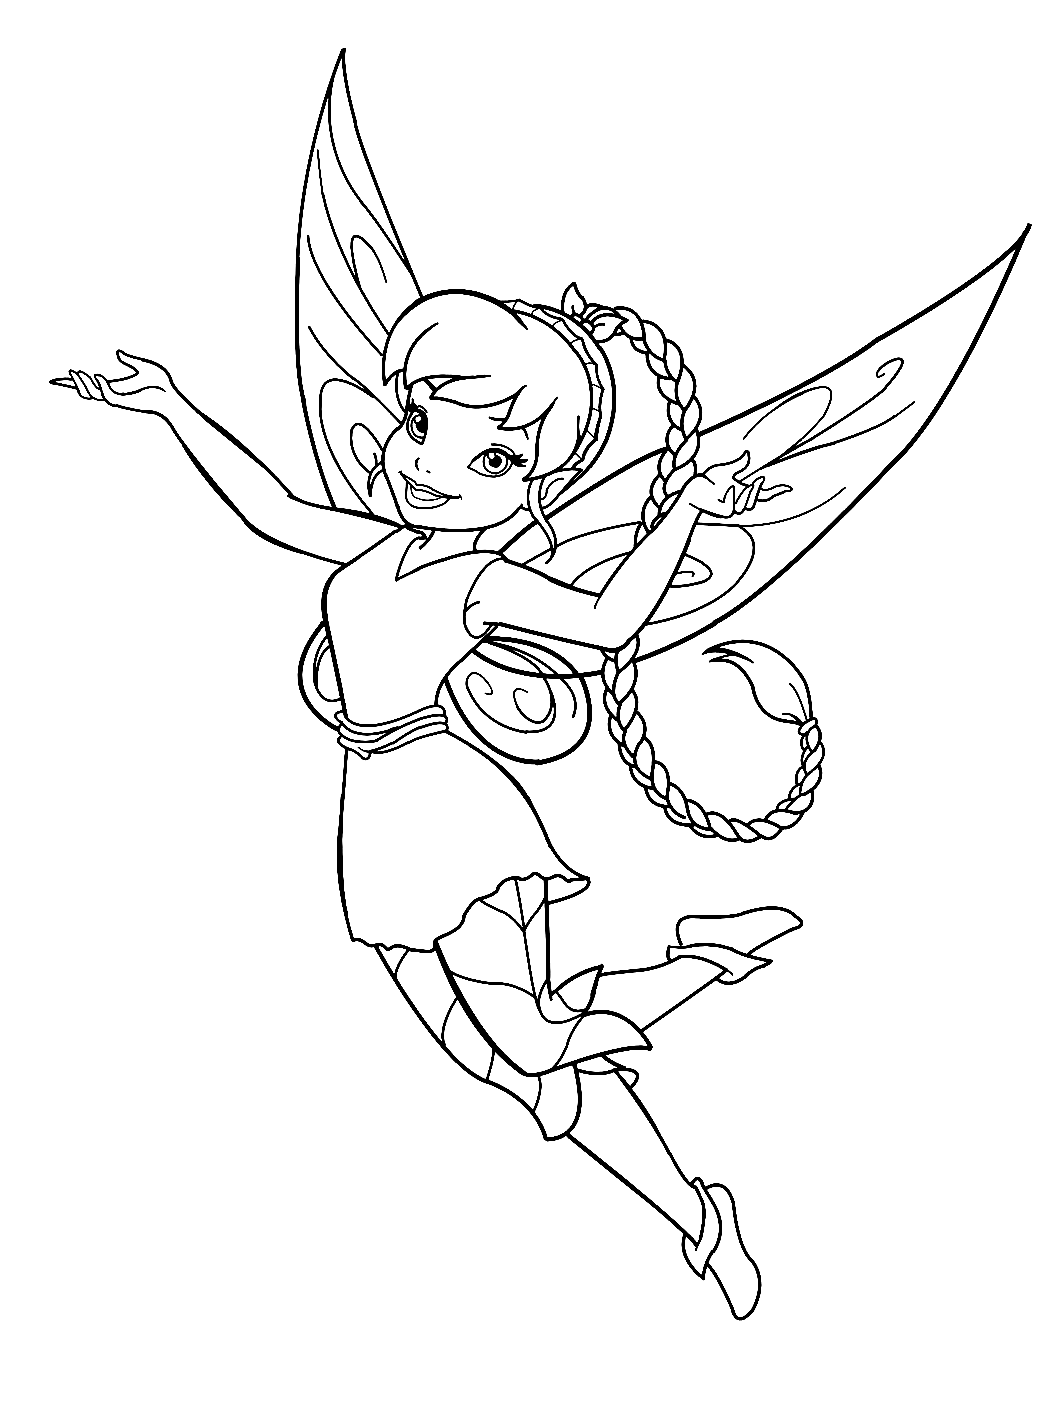 Fawn Animal Fairy, Fairy coloring pages